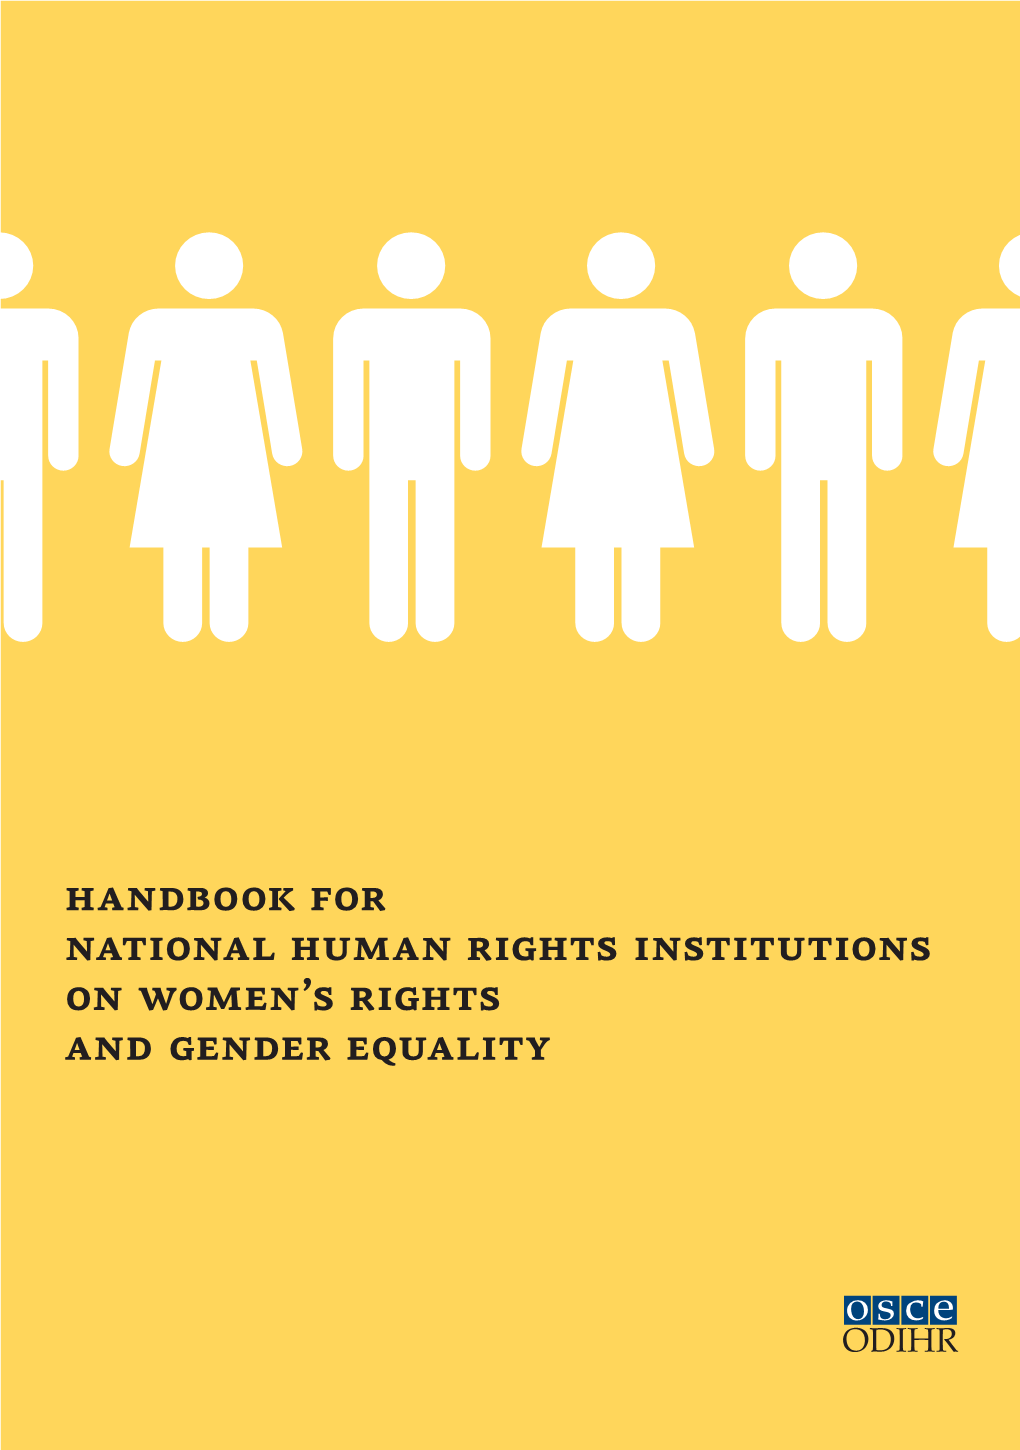 Handbook for National Human Rights Institutions on Womens